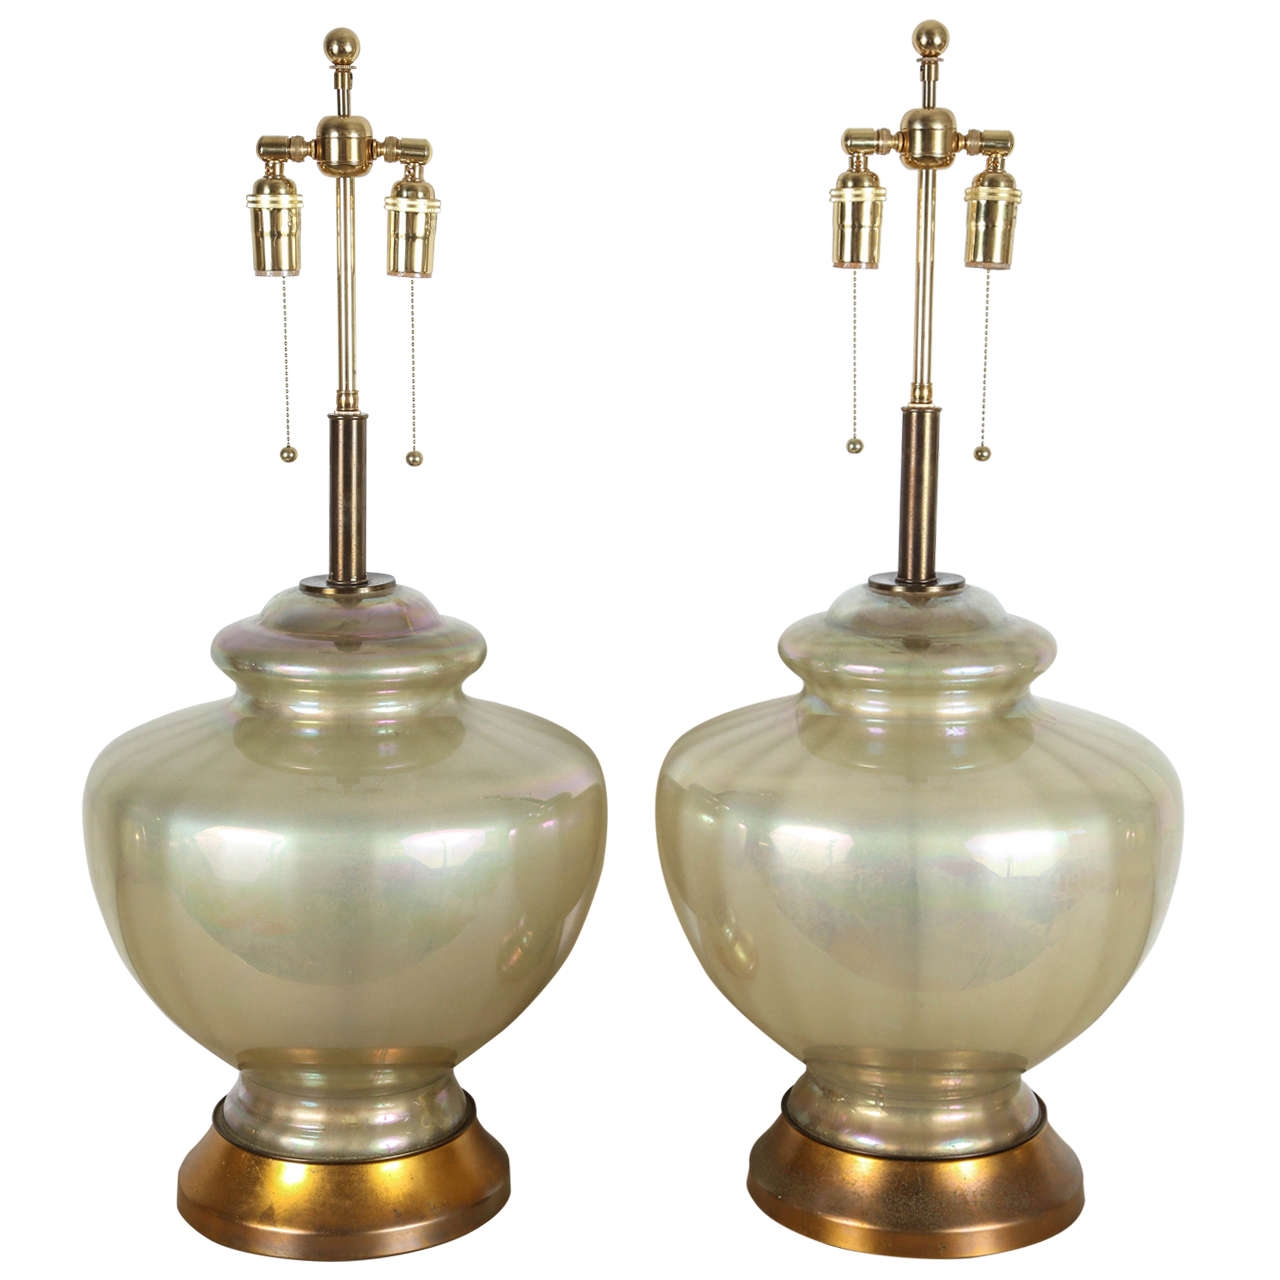 Pair of Large Pearlized Glass Lamps